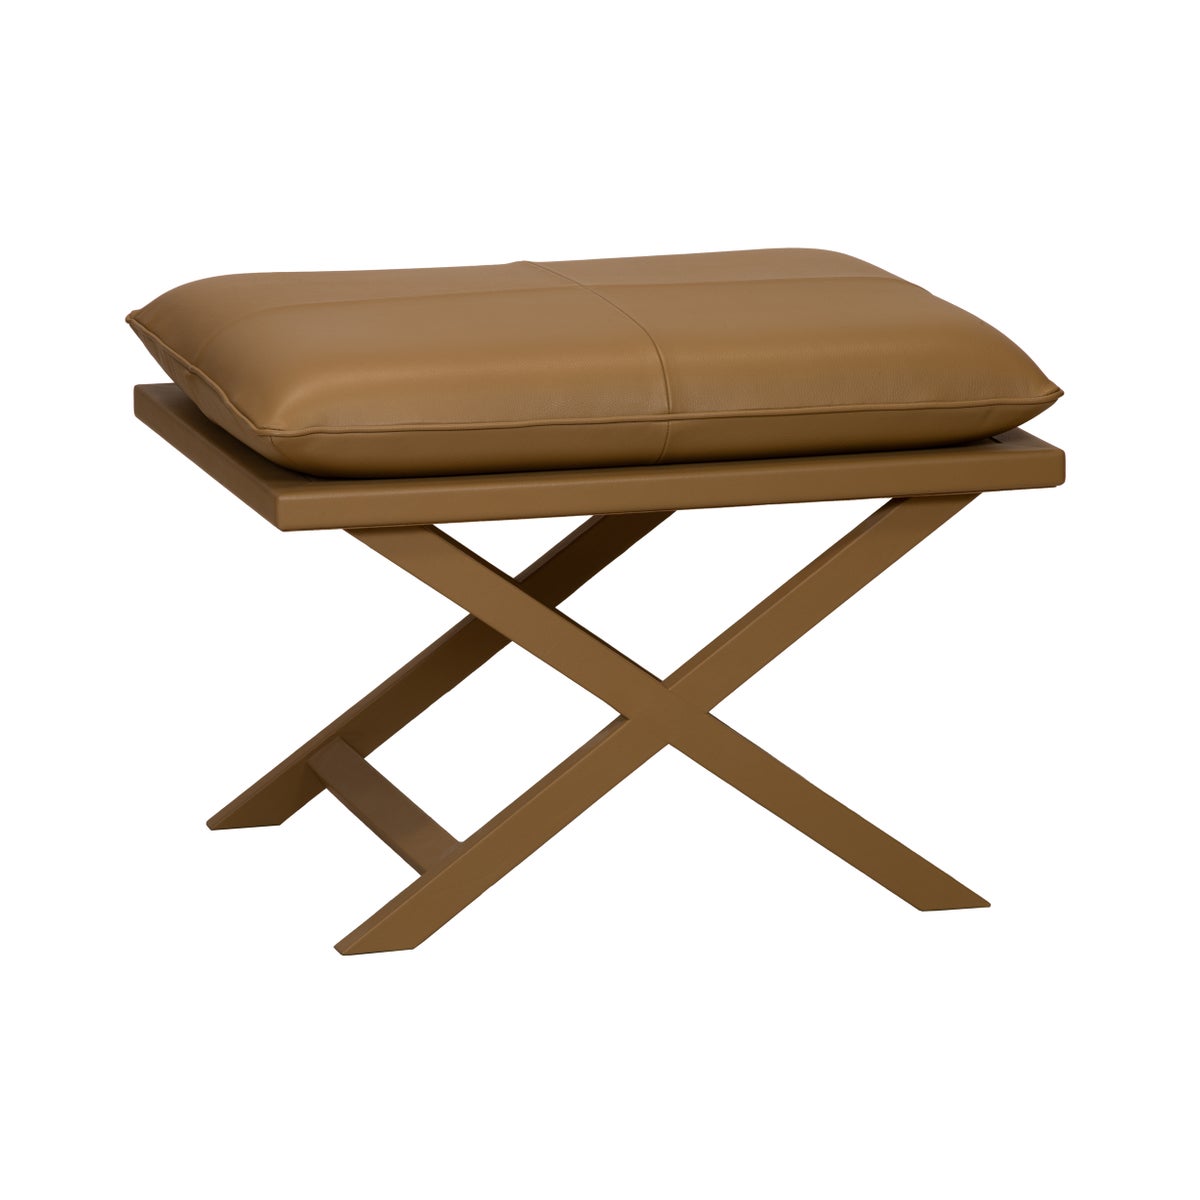 Sonoma Leather Stool in Natural